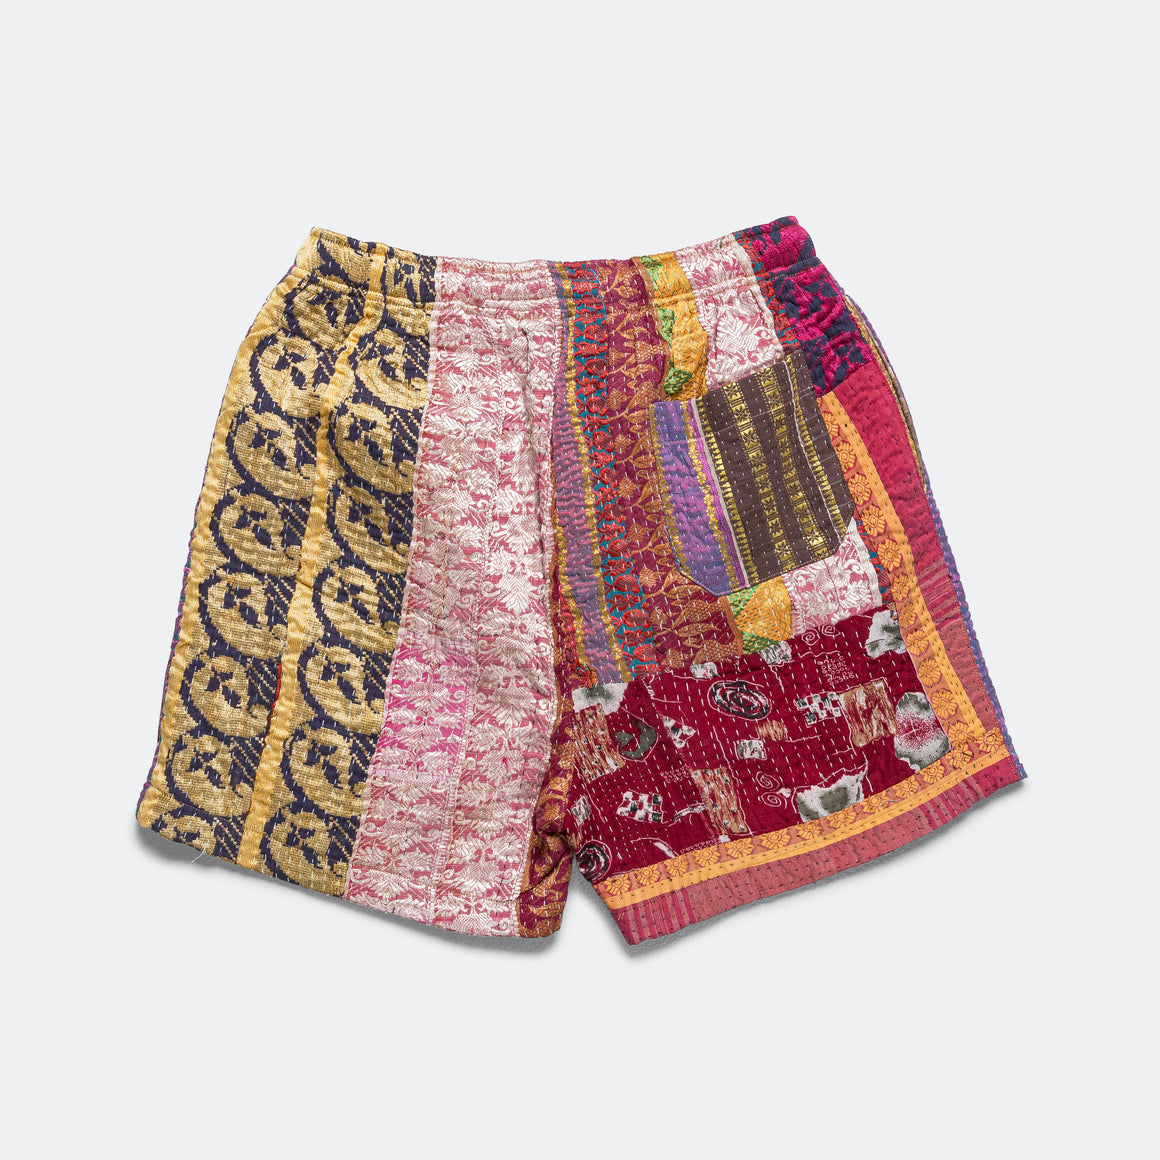 Kartik Research - One Of One Vintage Kantha Shorts - 34" - UP THERE